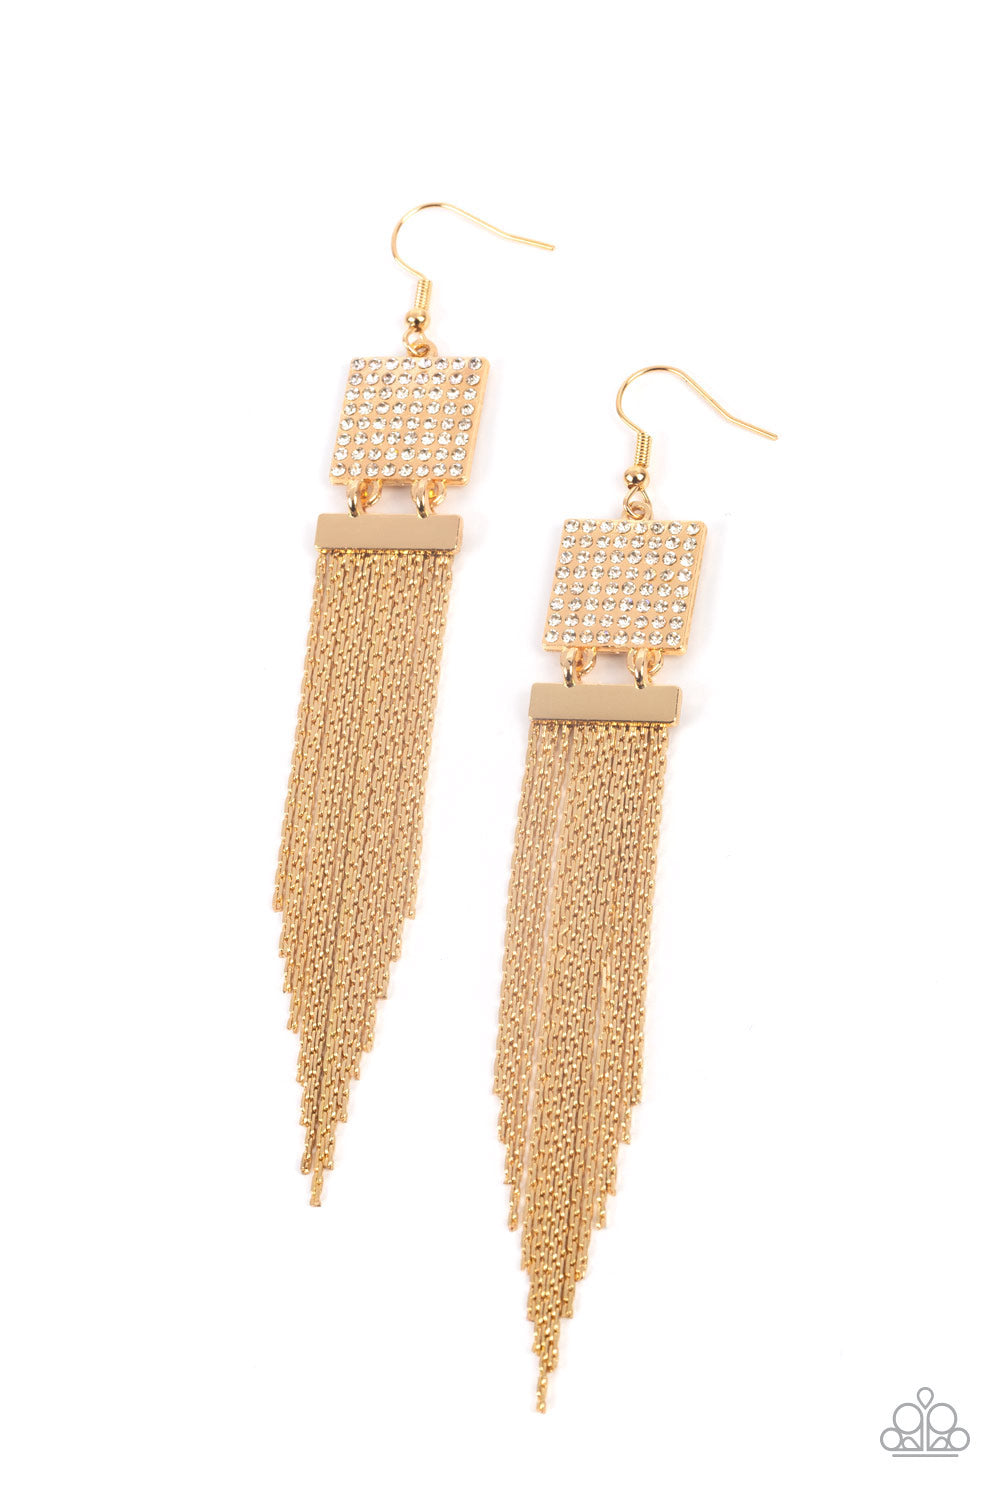 Dramatically Deco Gold Earrings March 2022 Life of the Party Exclusive🎉Limited Quantity! - Princess Glam Shop